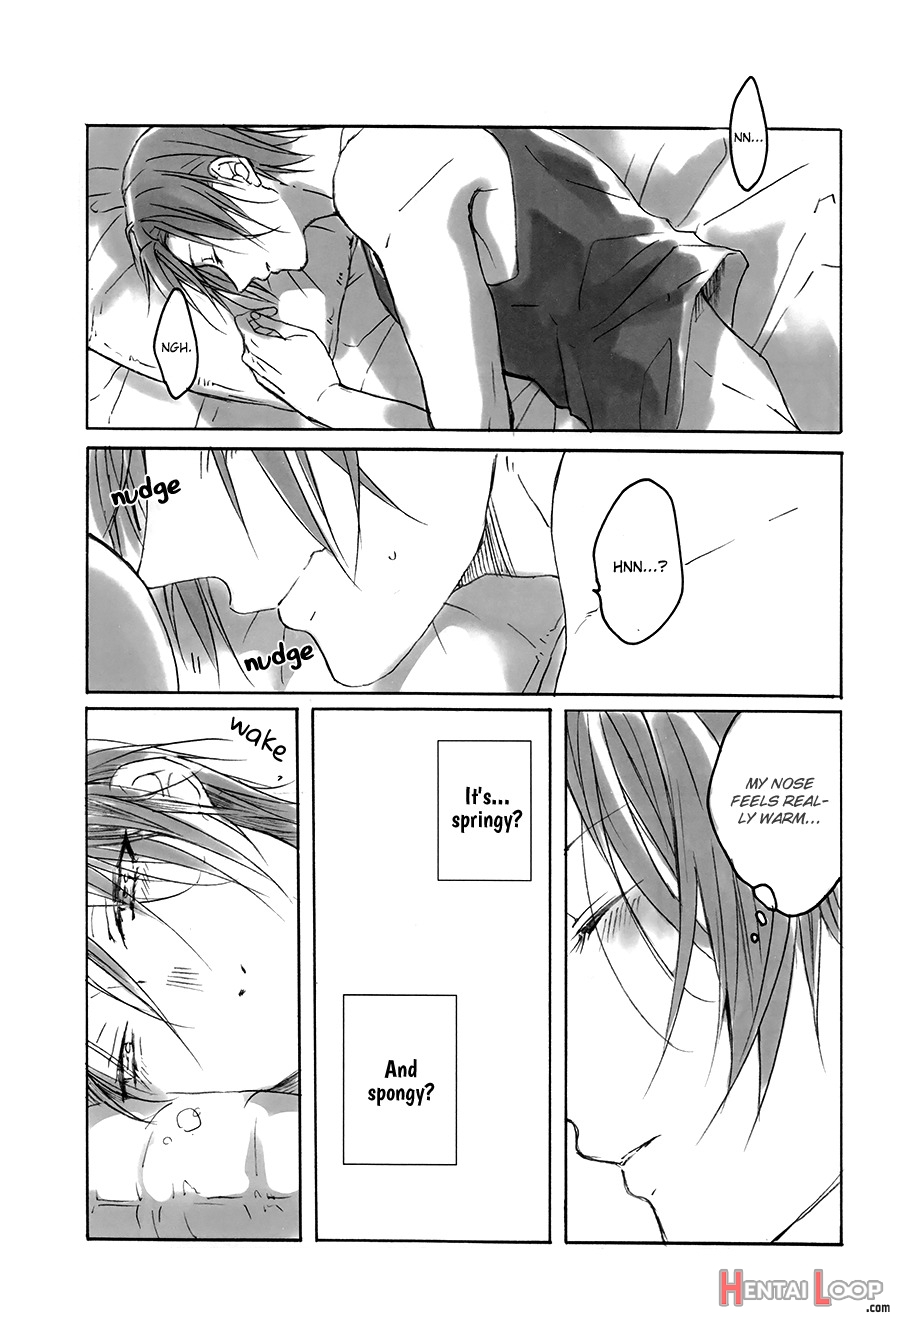 Can Haruka Have Sex With Rin After Suddenly Turning Into An Odd Little Lifeform? page 2